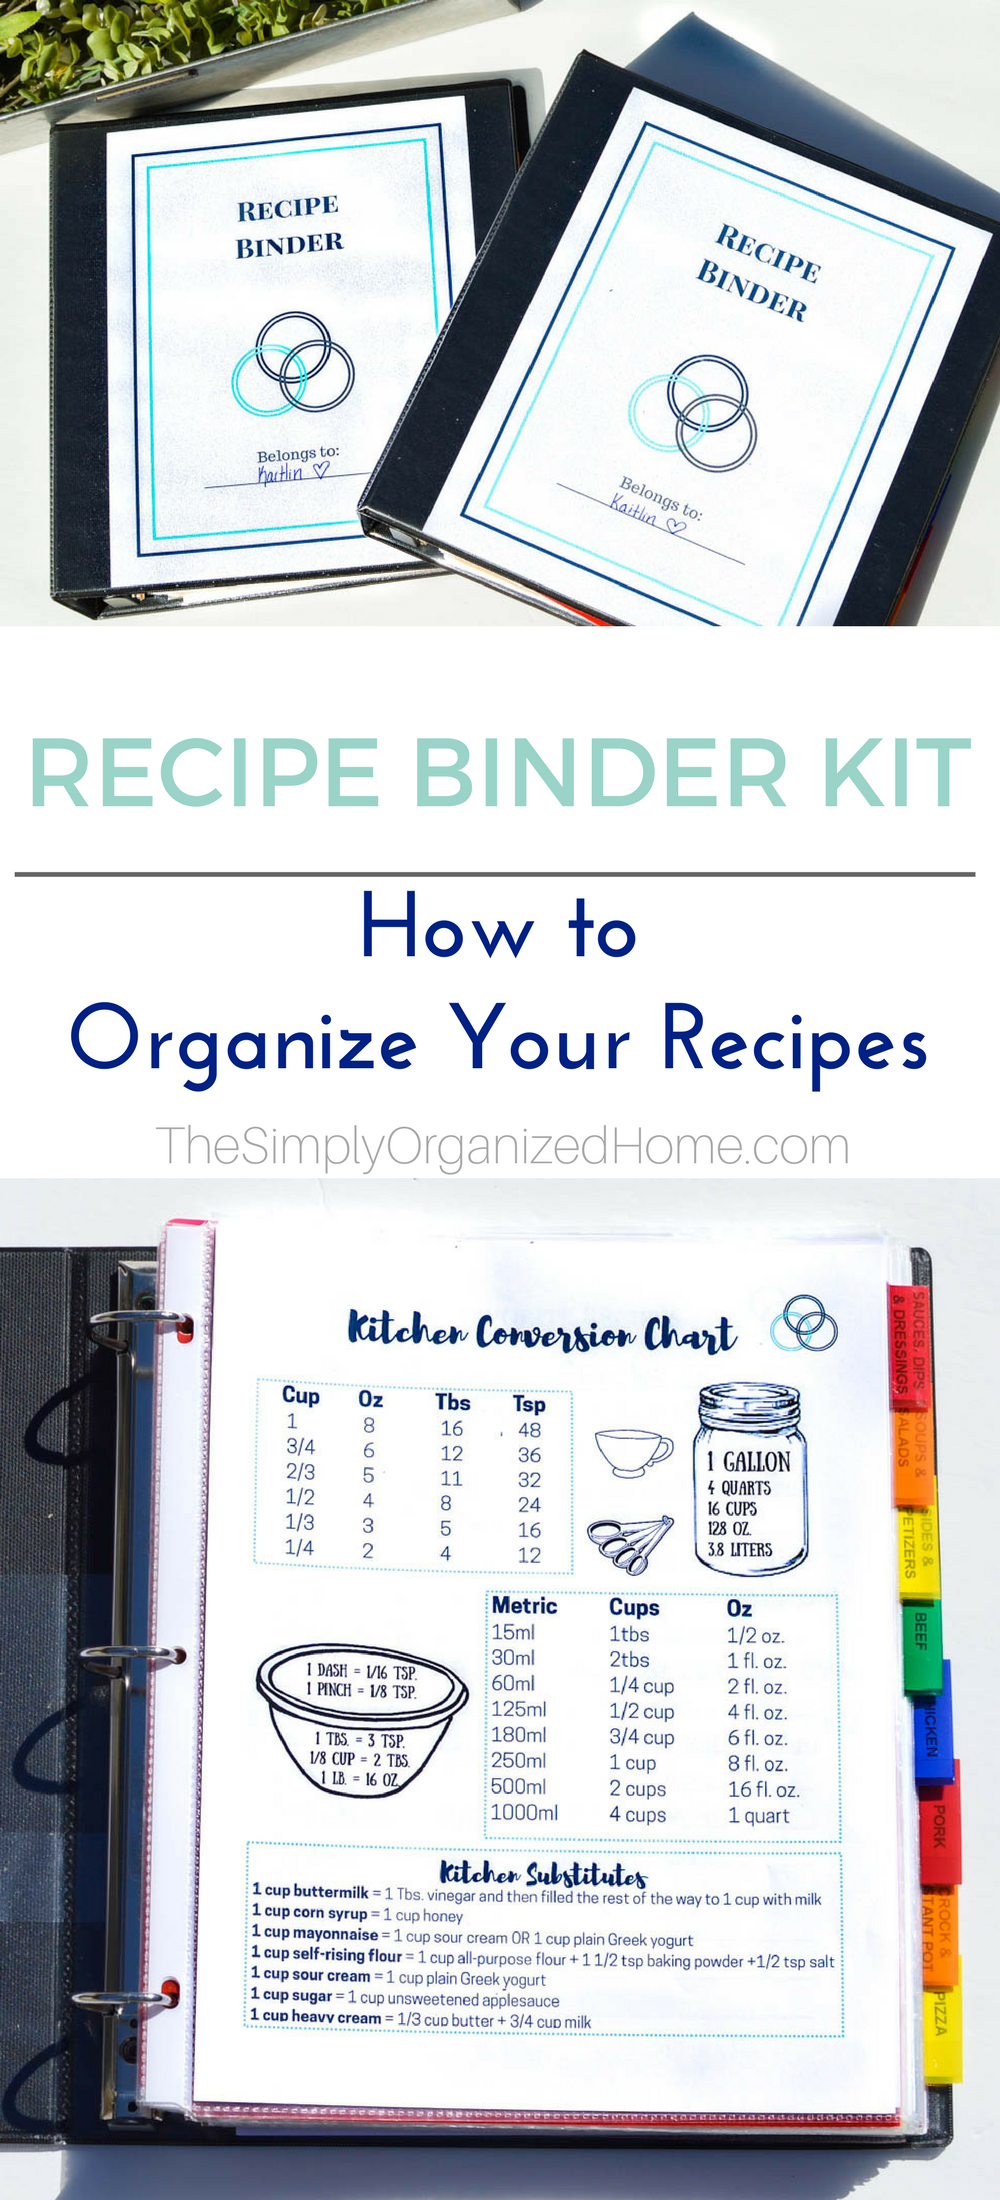 how-to-organize-your-recipes-with-a-recipe-binder-the-simply-organized-home